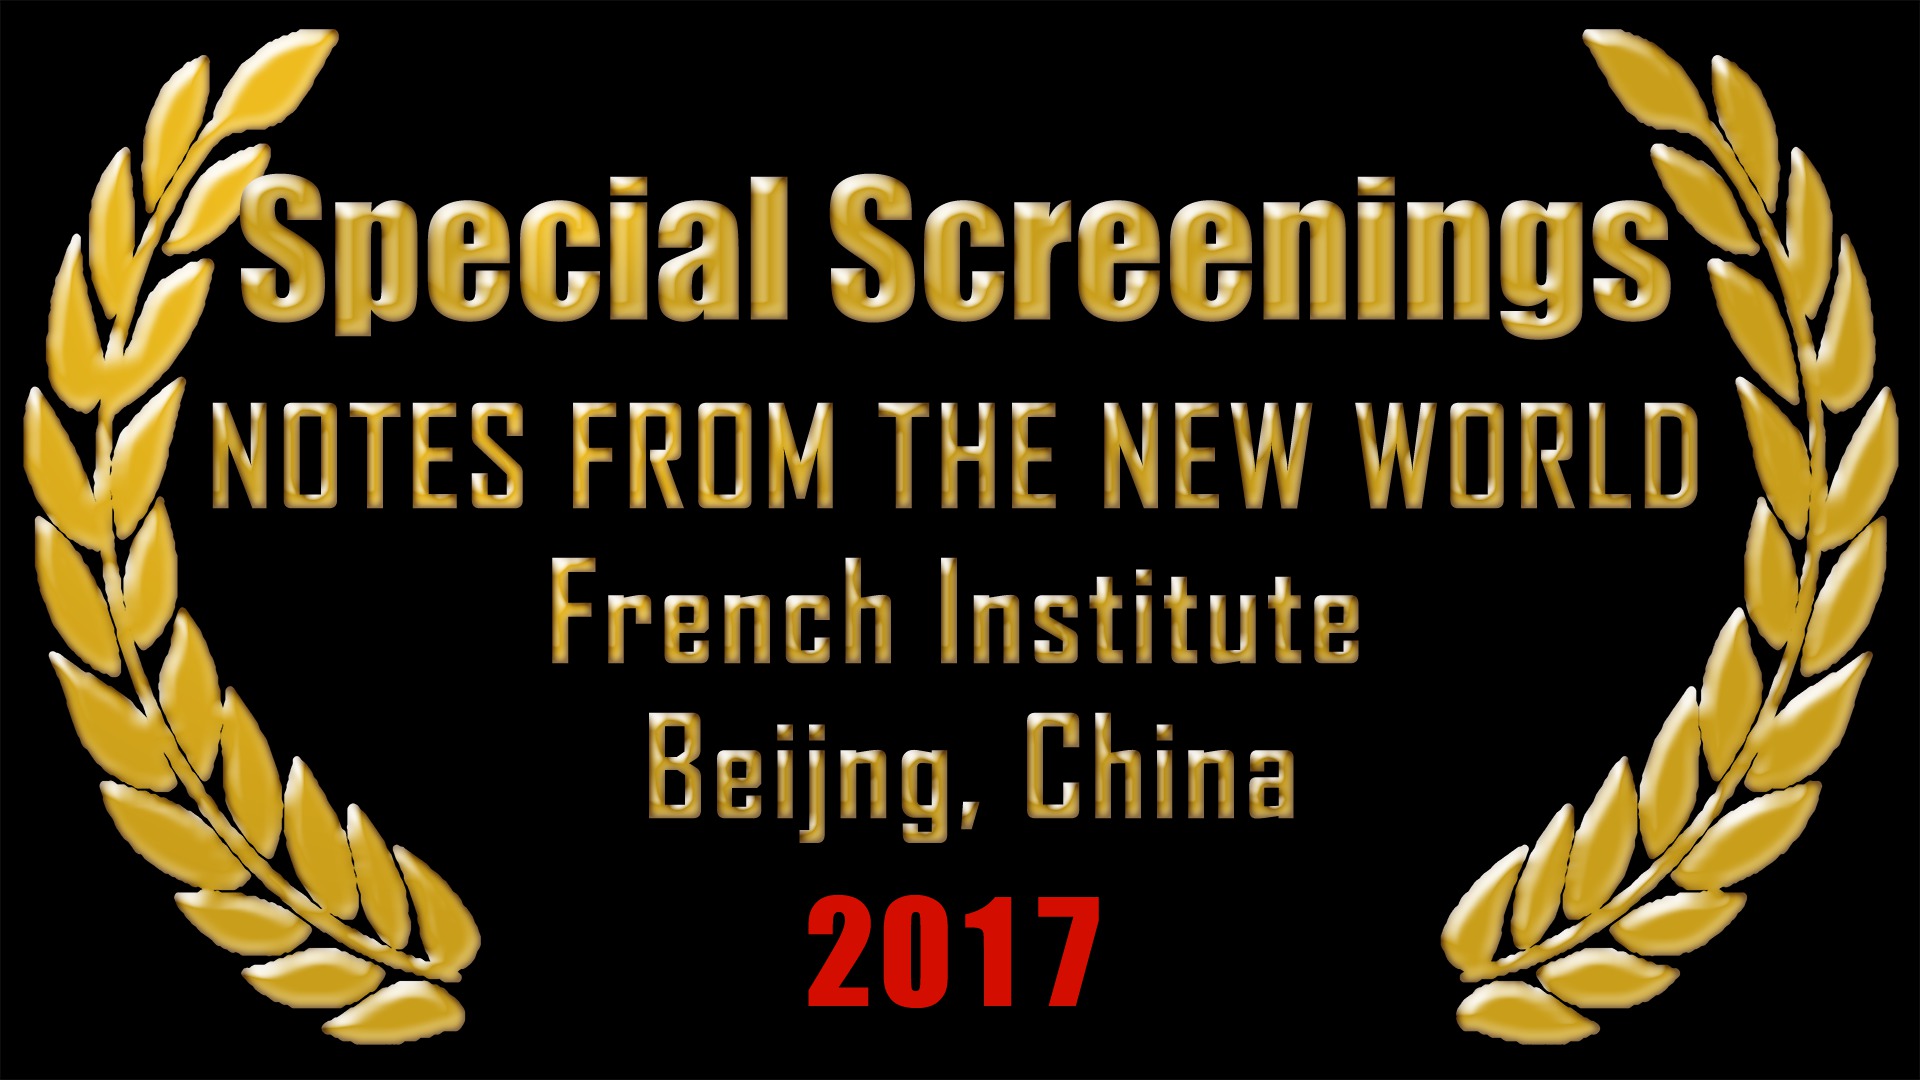 Special Screenings - French Institute, Beijing, China 2017